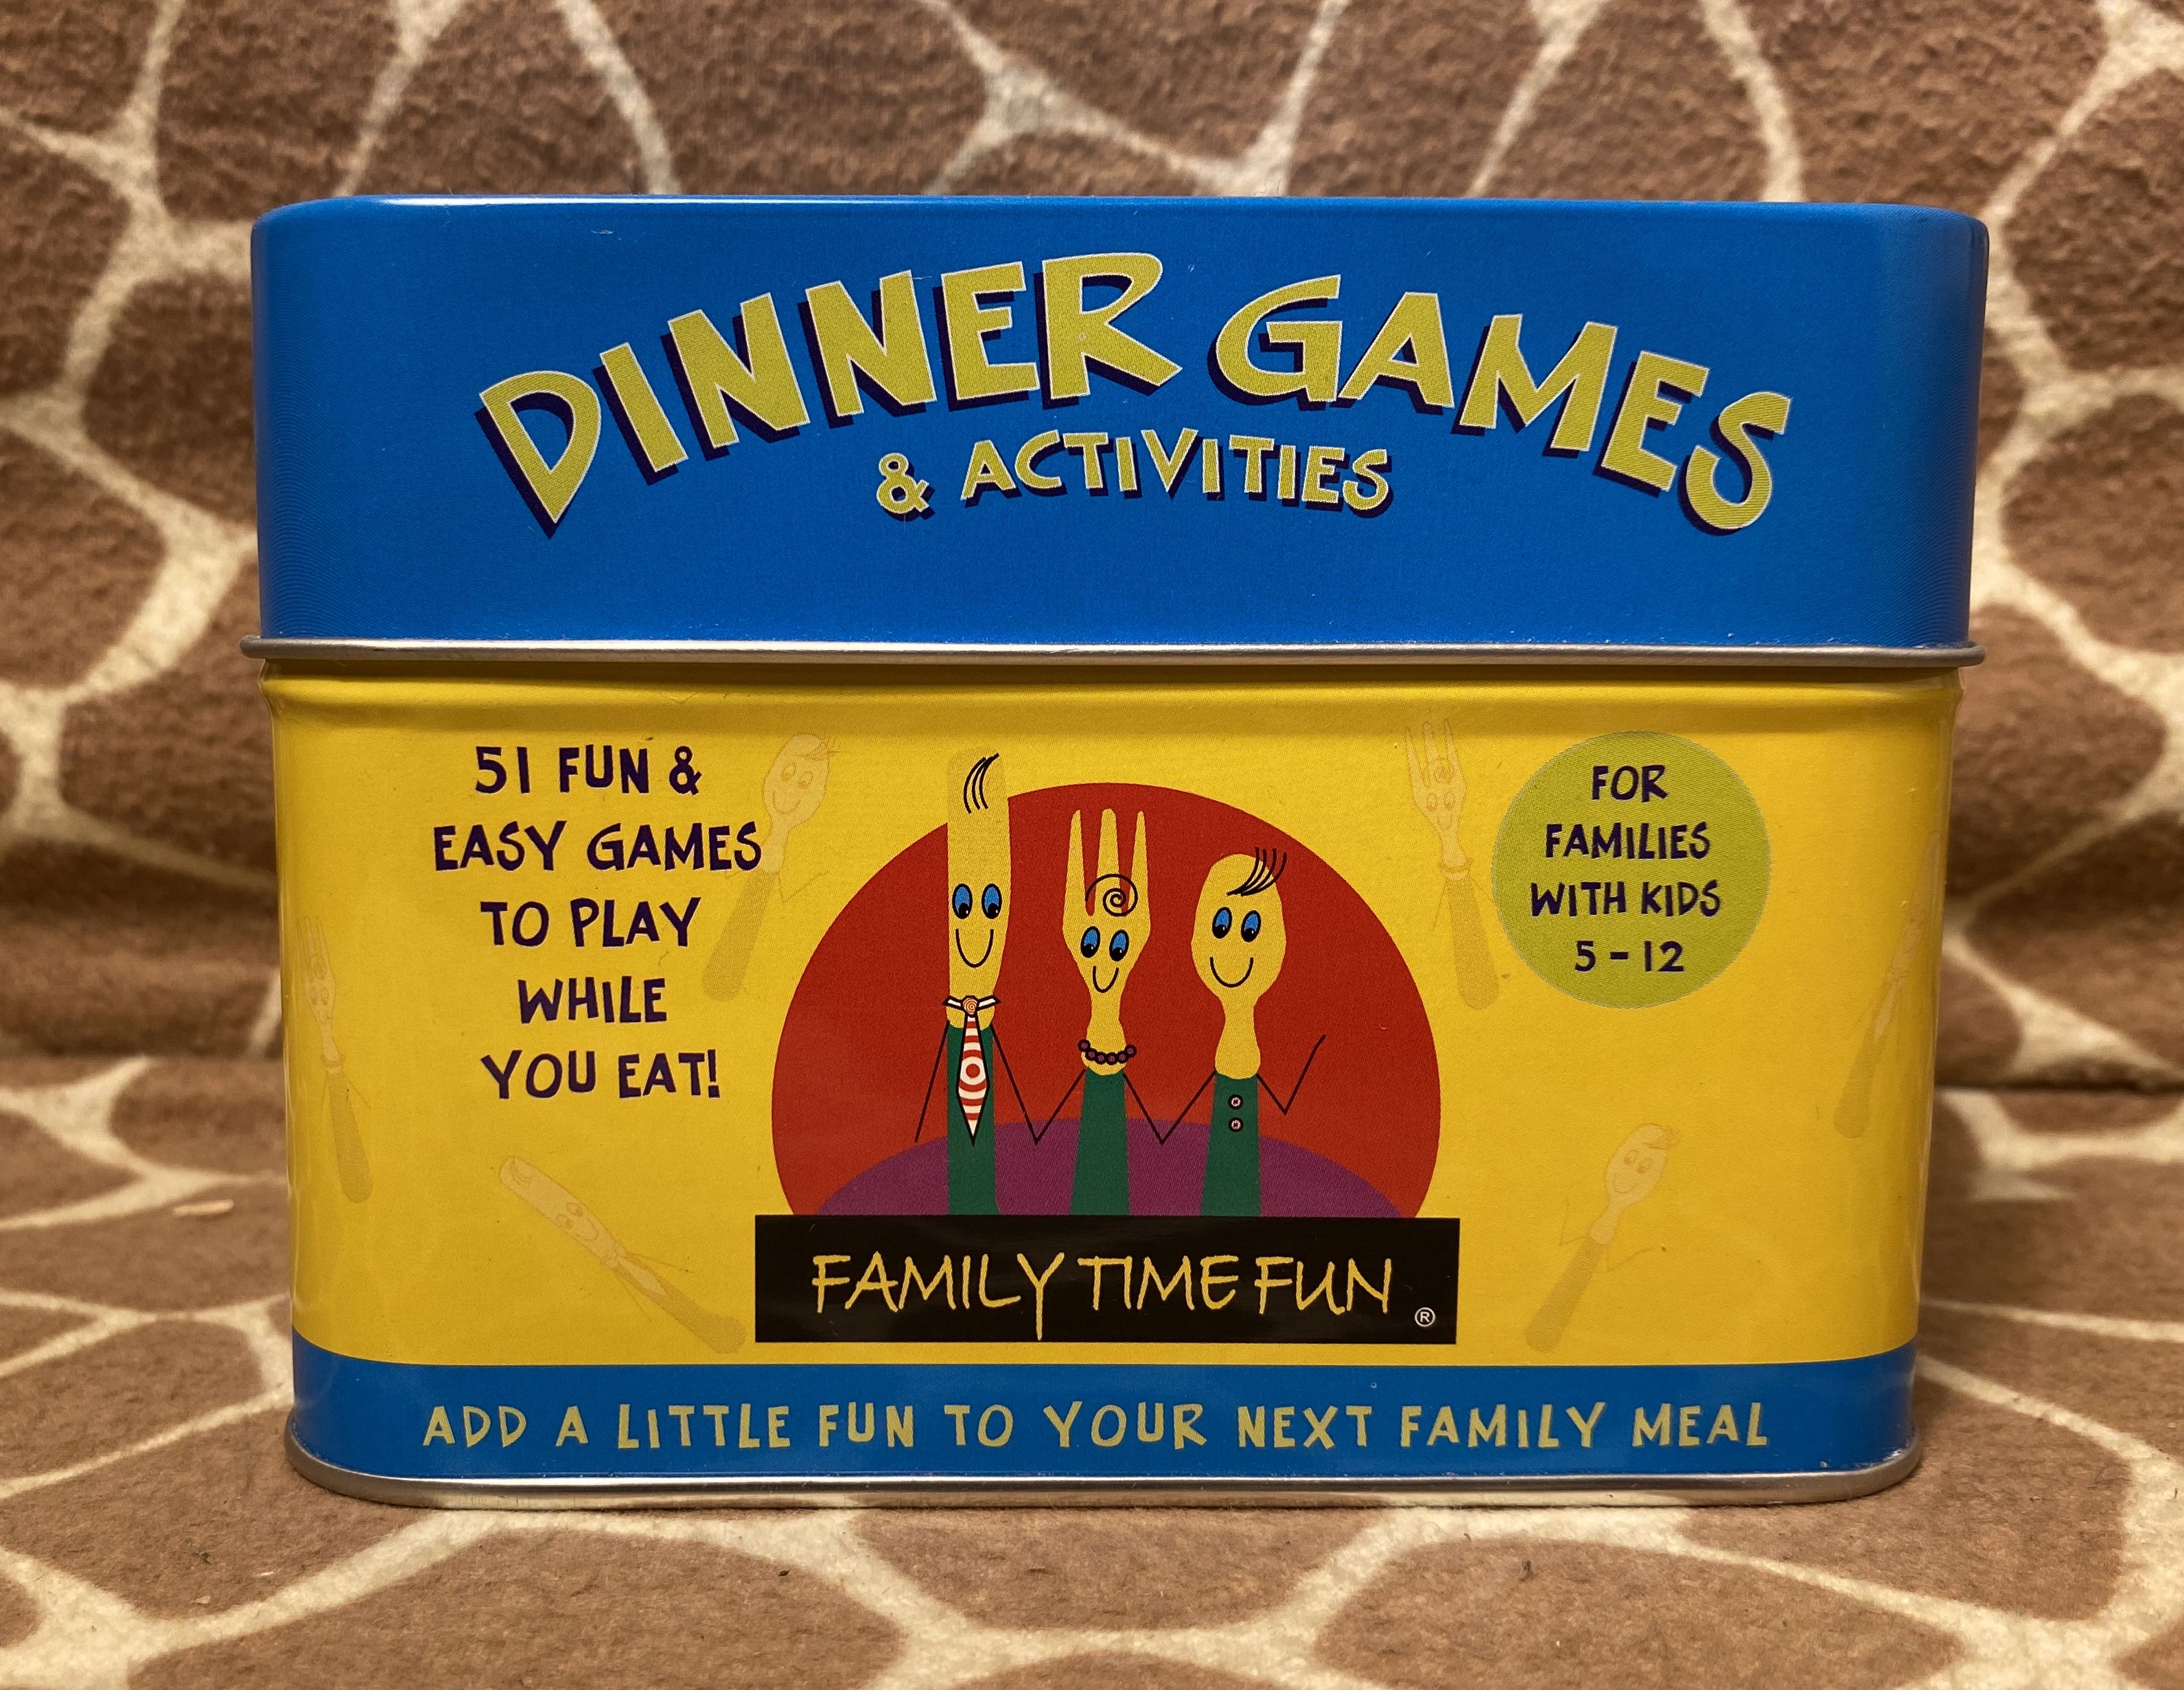 Family Time Fun Dinner Games and Activities Ftf1 852426001044 for sale online 